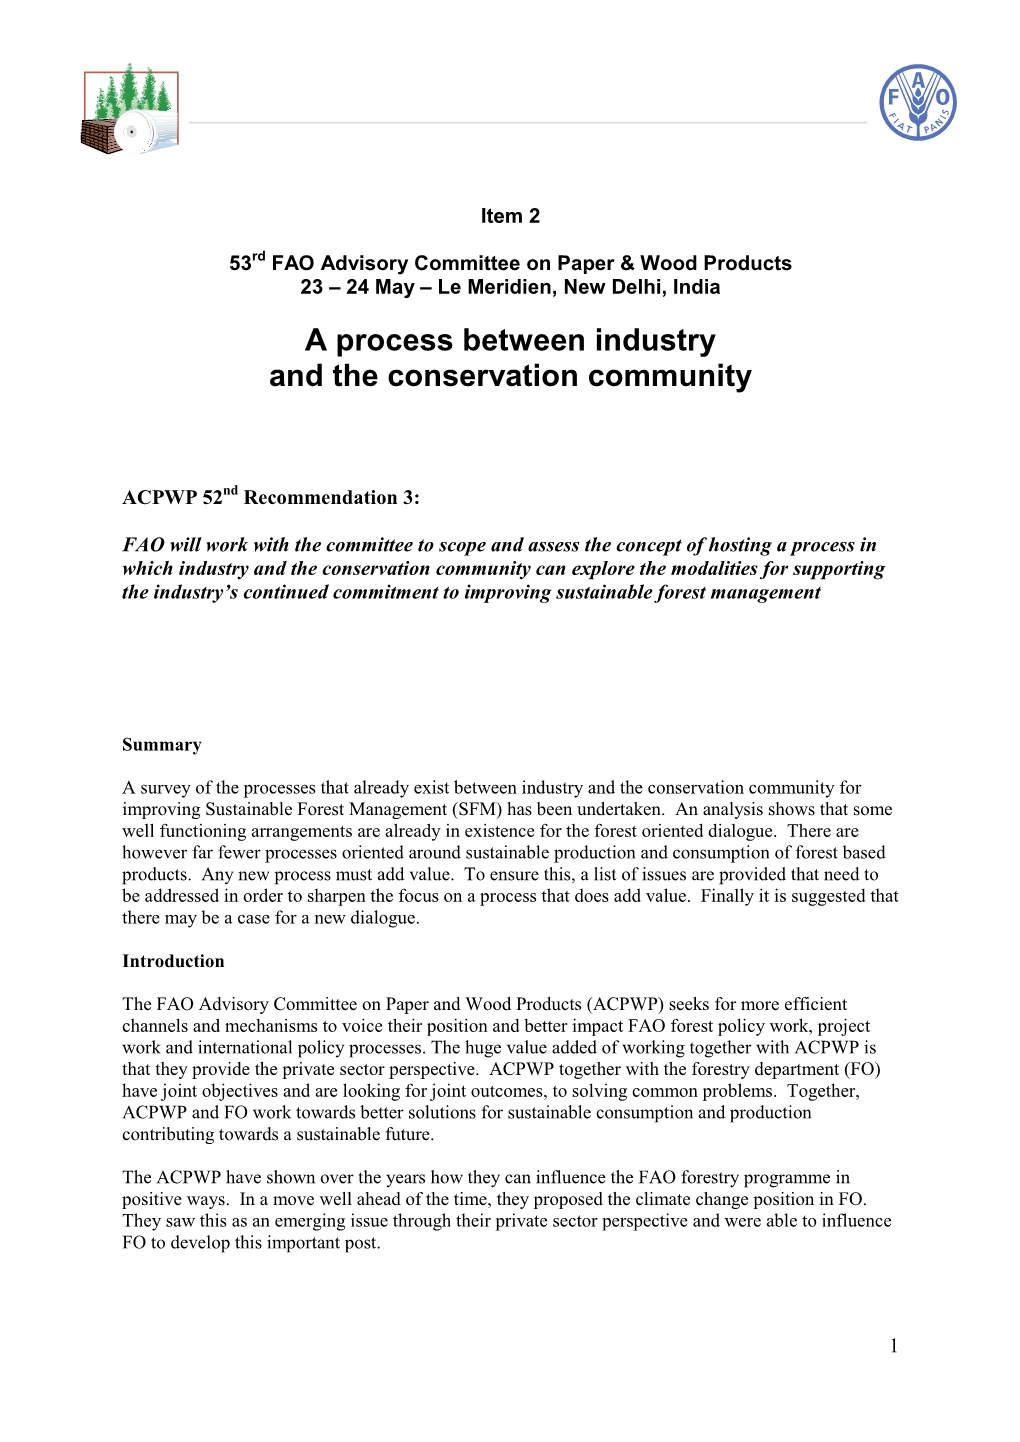 A Process Between Industry and the Conservation Community